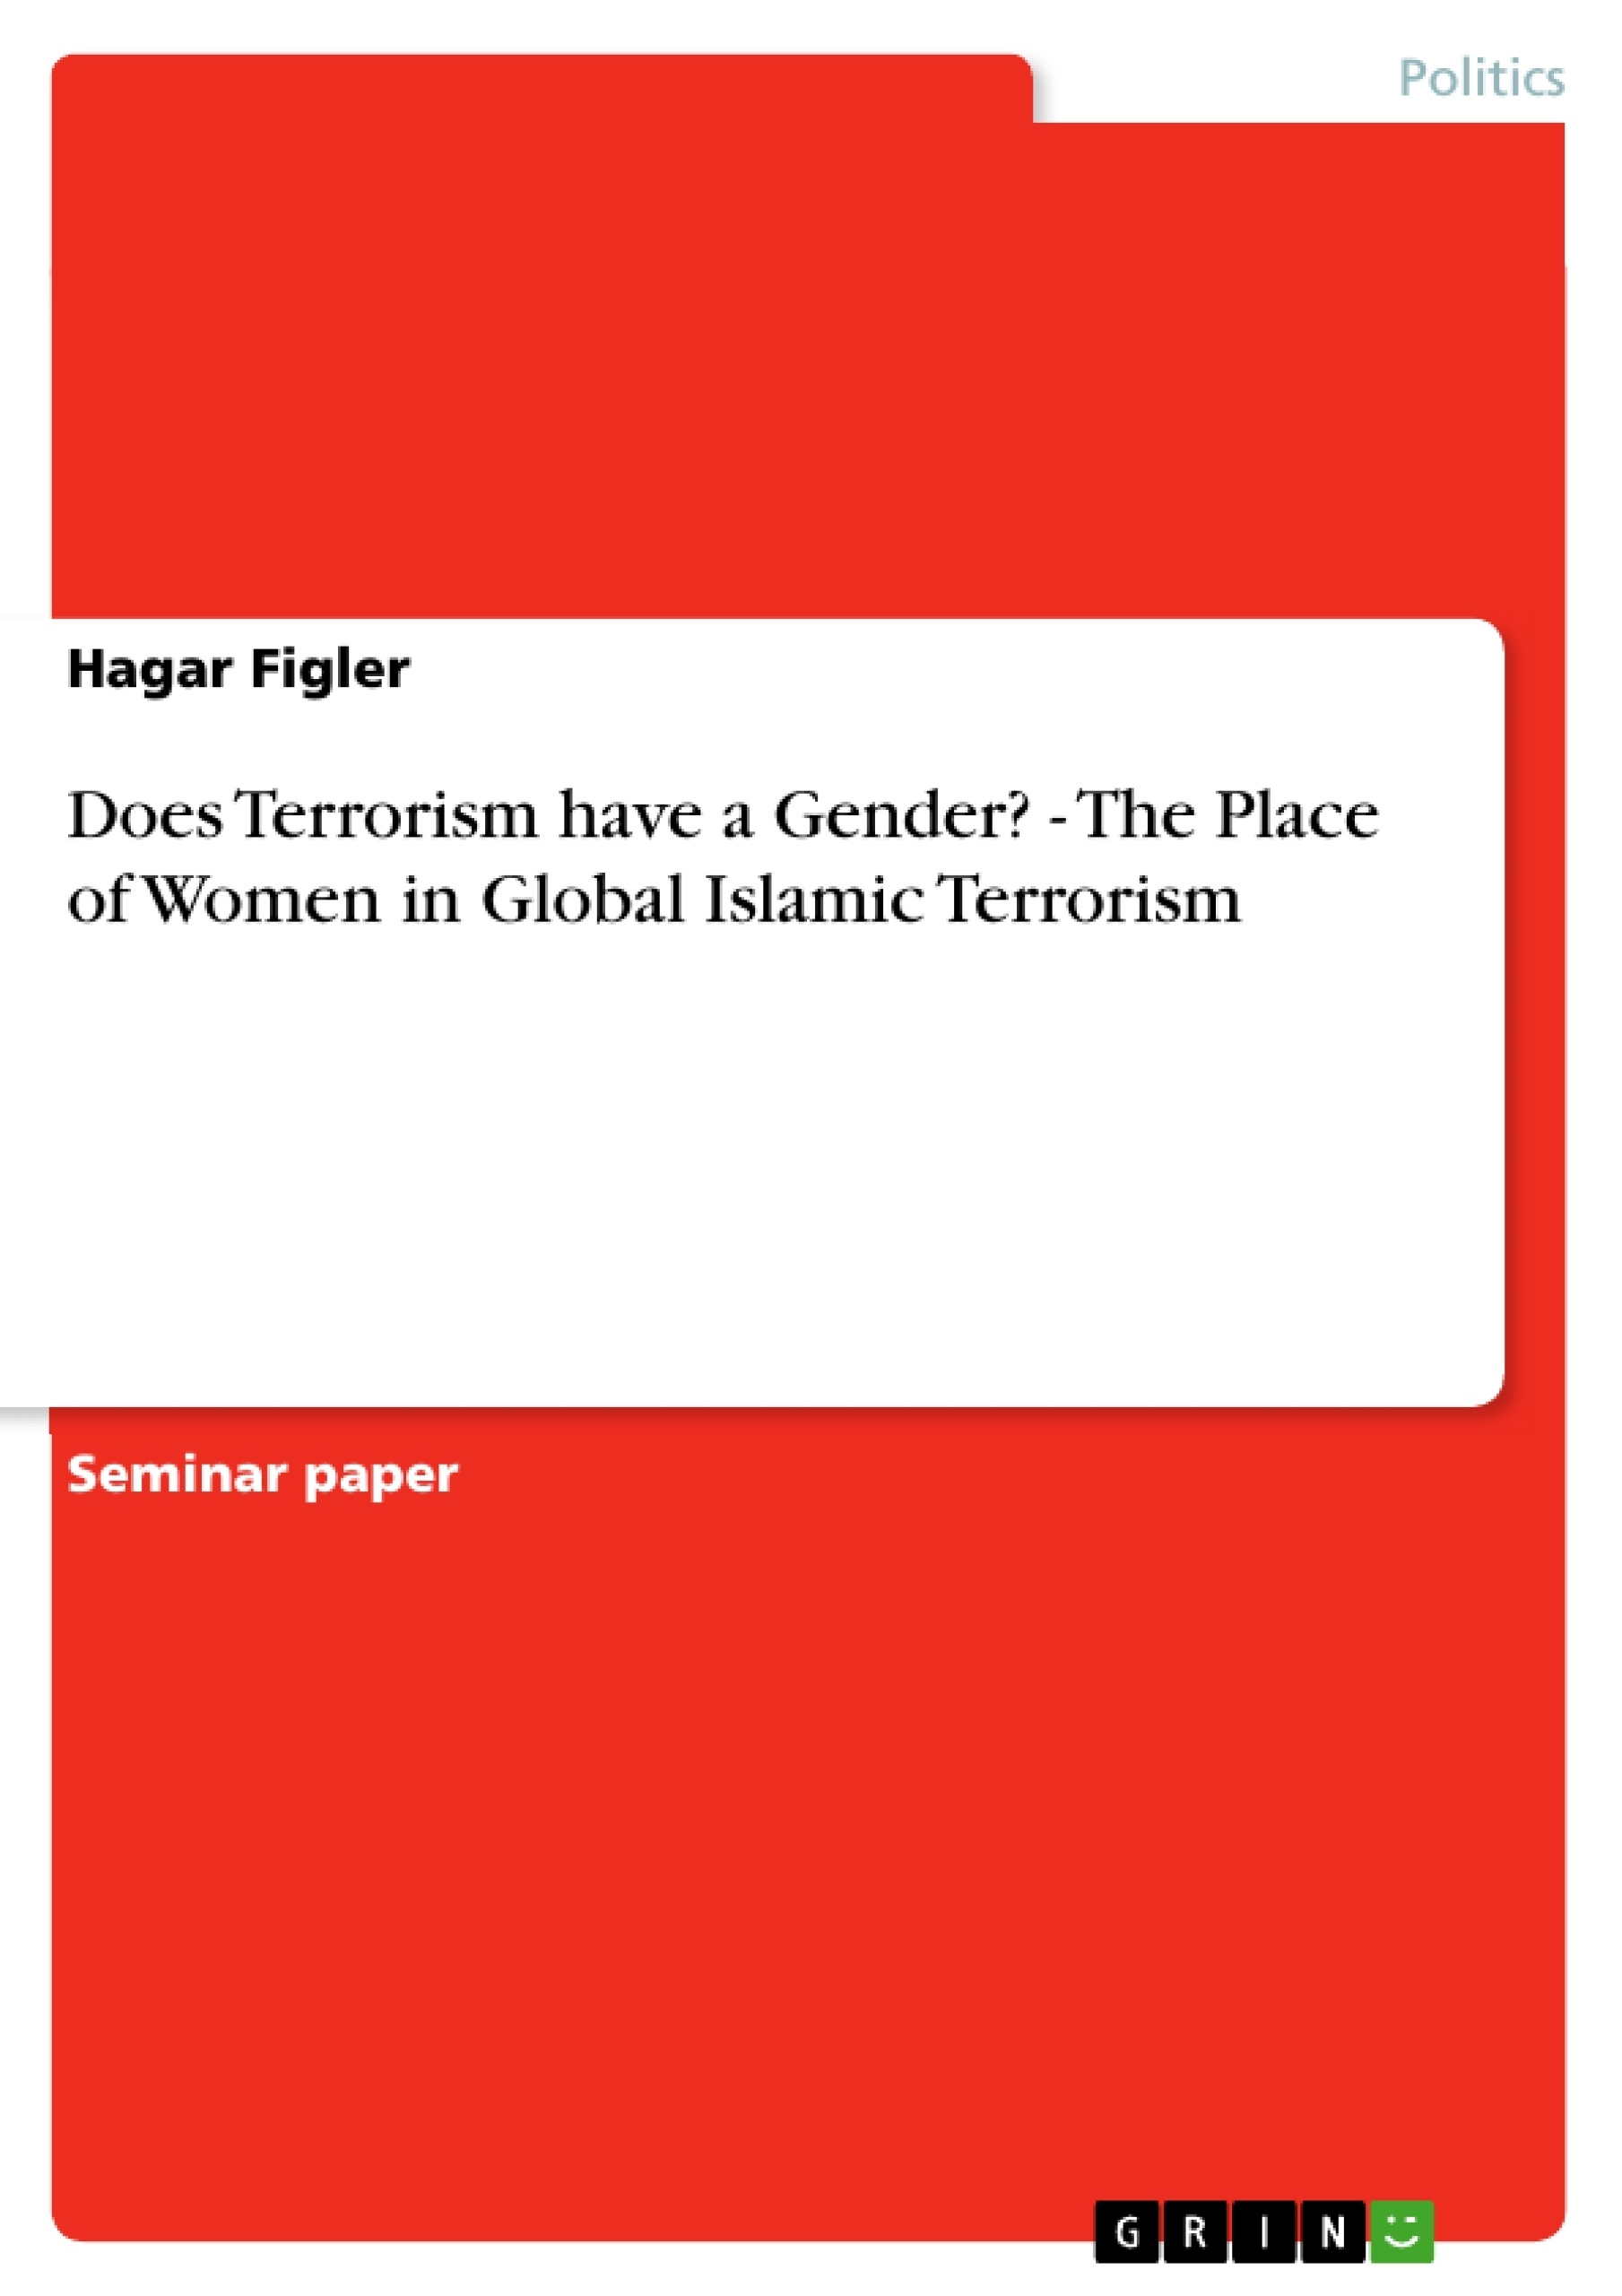 Title: Does Terrorism have a Gender? - The Place of Women in Global Islamic Terrorism